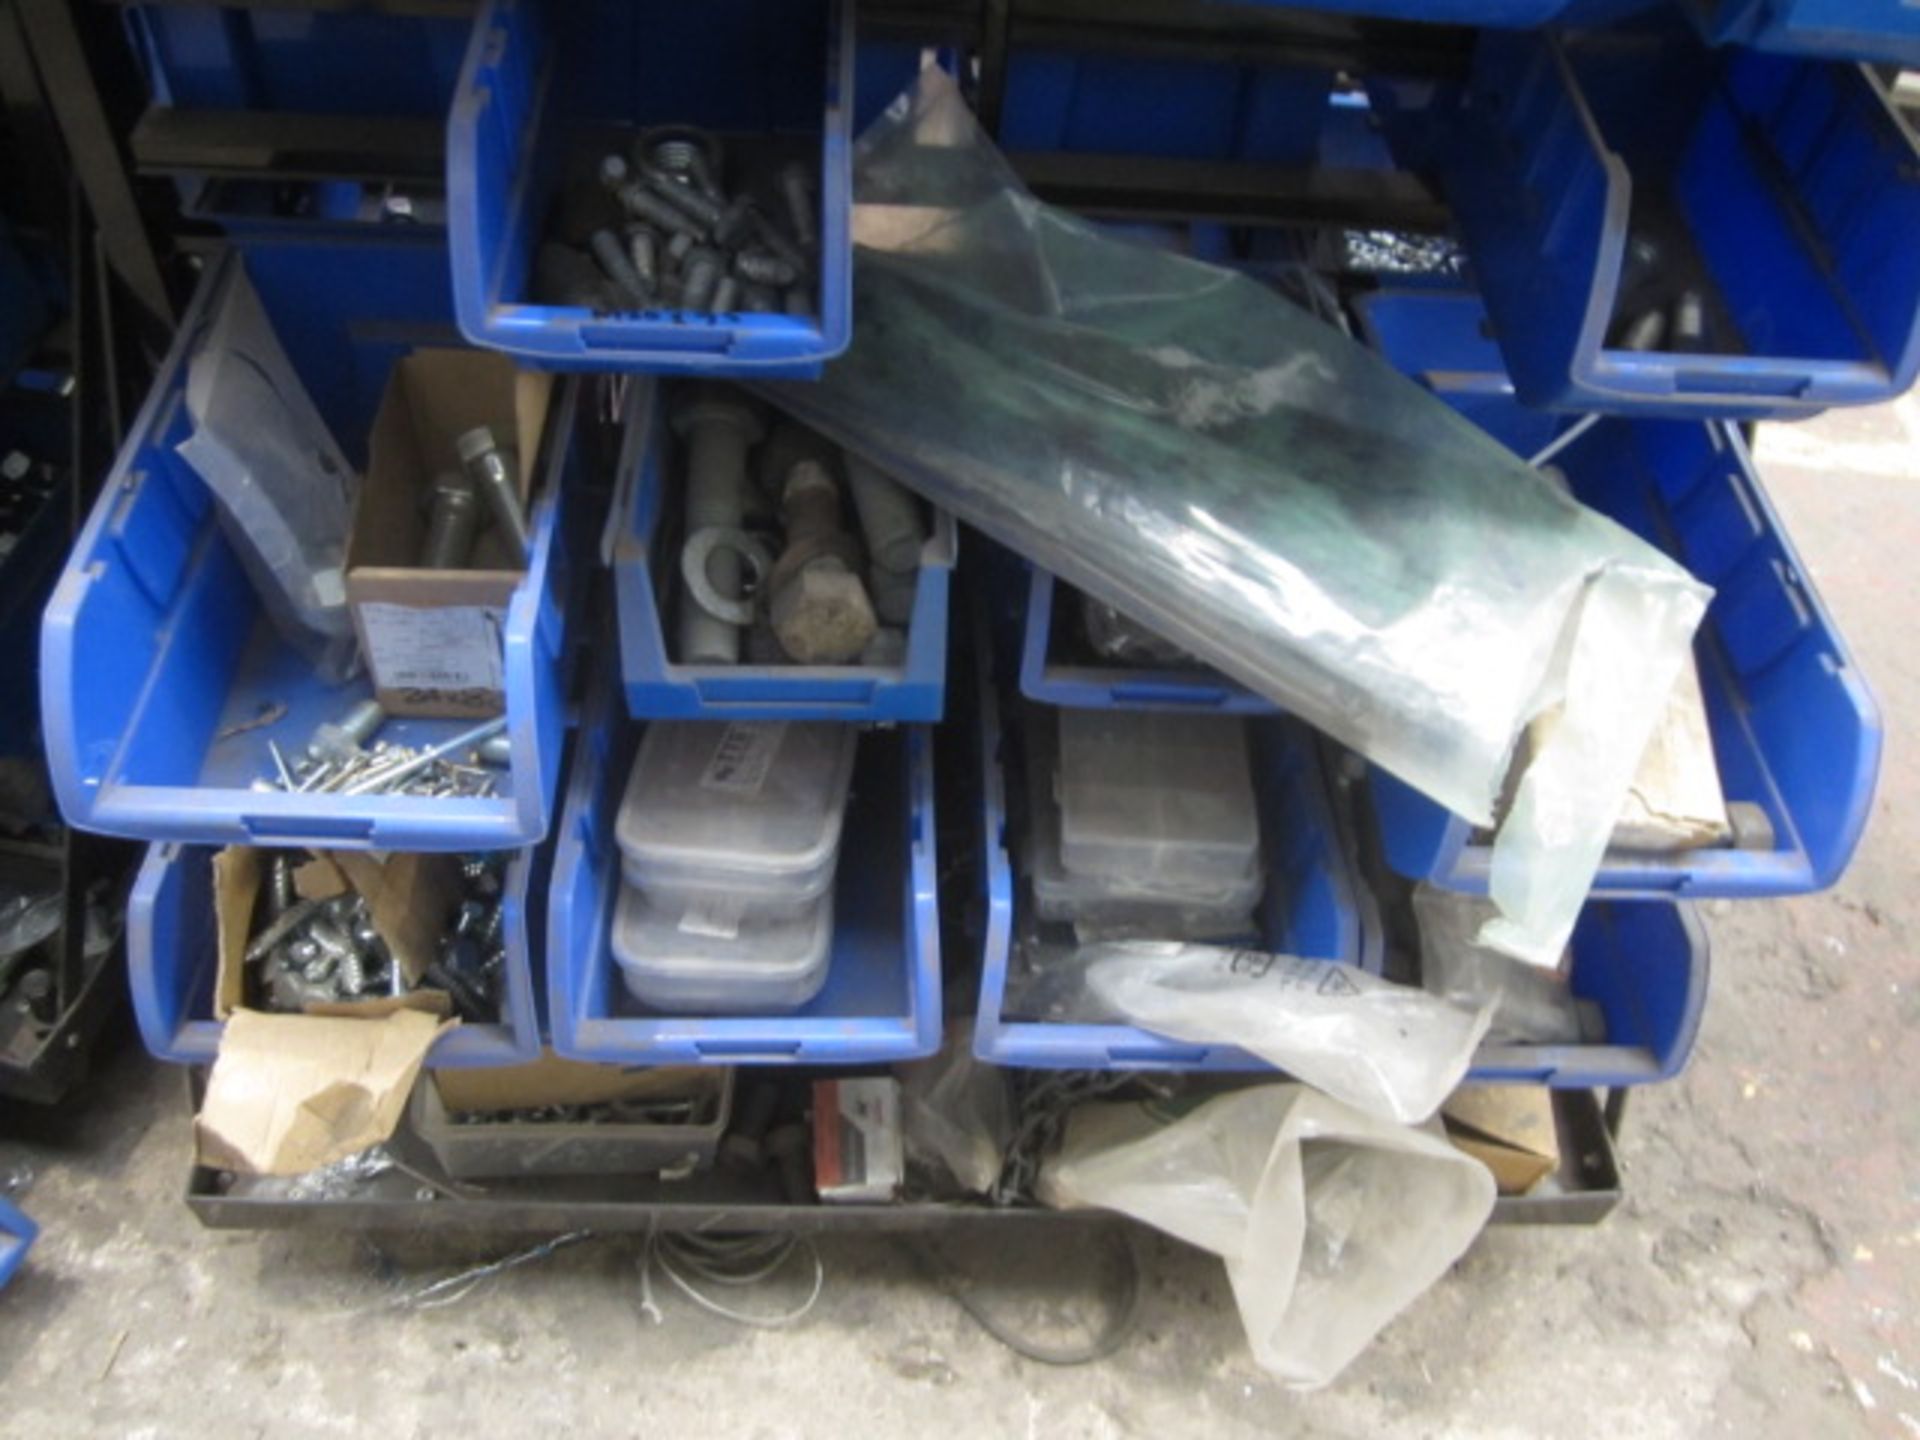 Two mobile multi bin storage racks with contents including bolts, washers, nuts, screws, threaded - Image 5 of 10